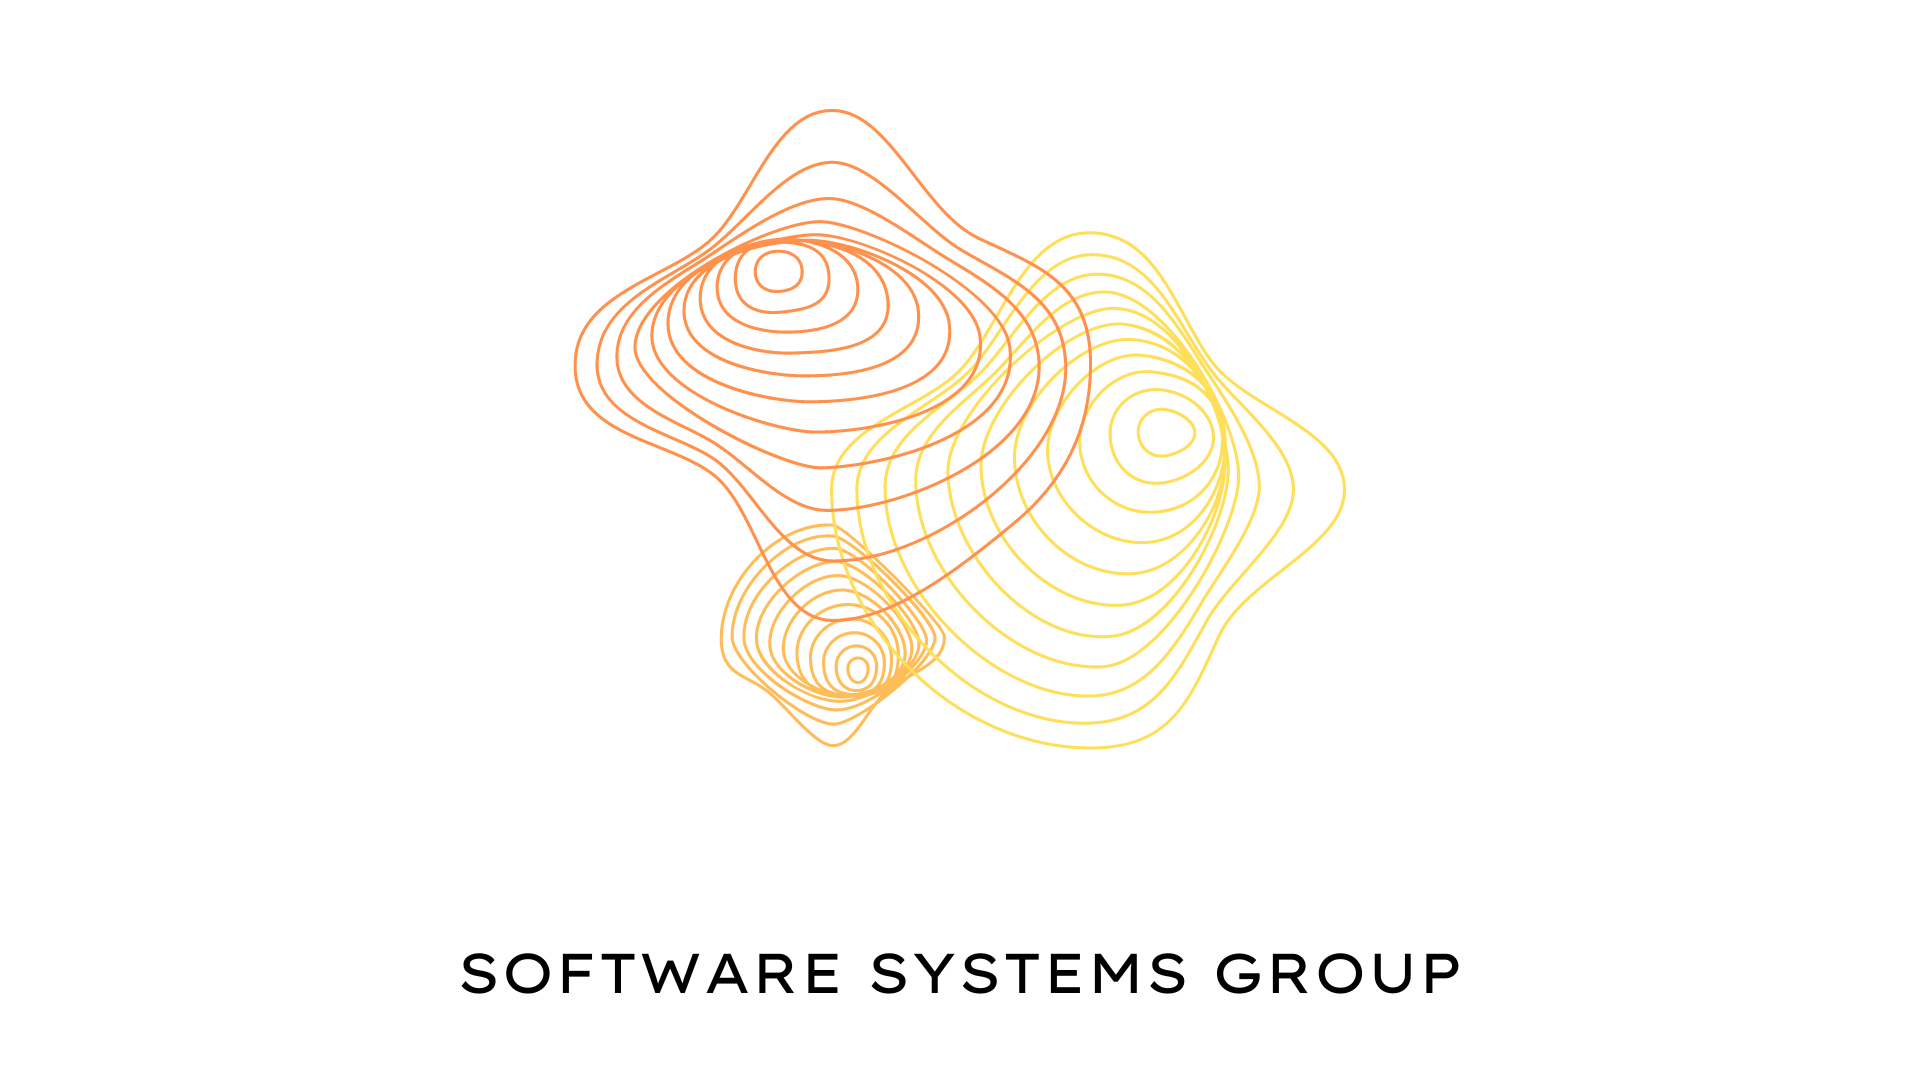 Illustration of Software Systems Group